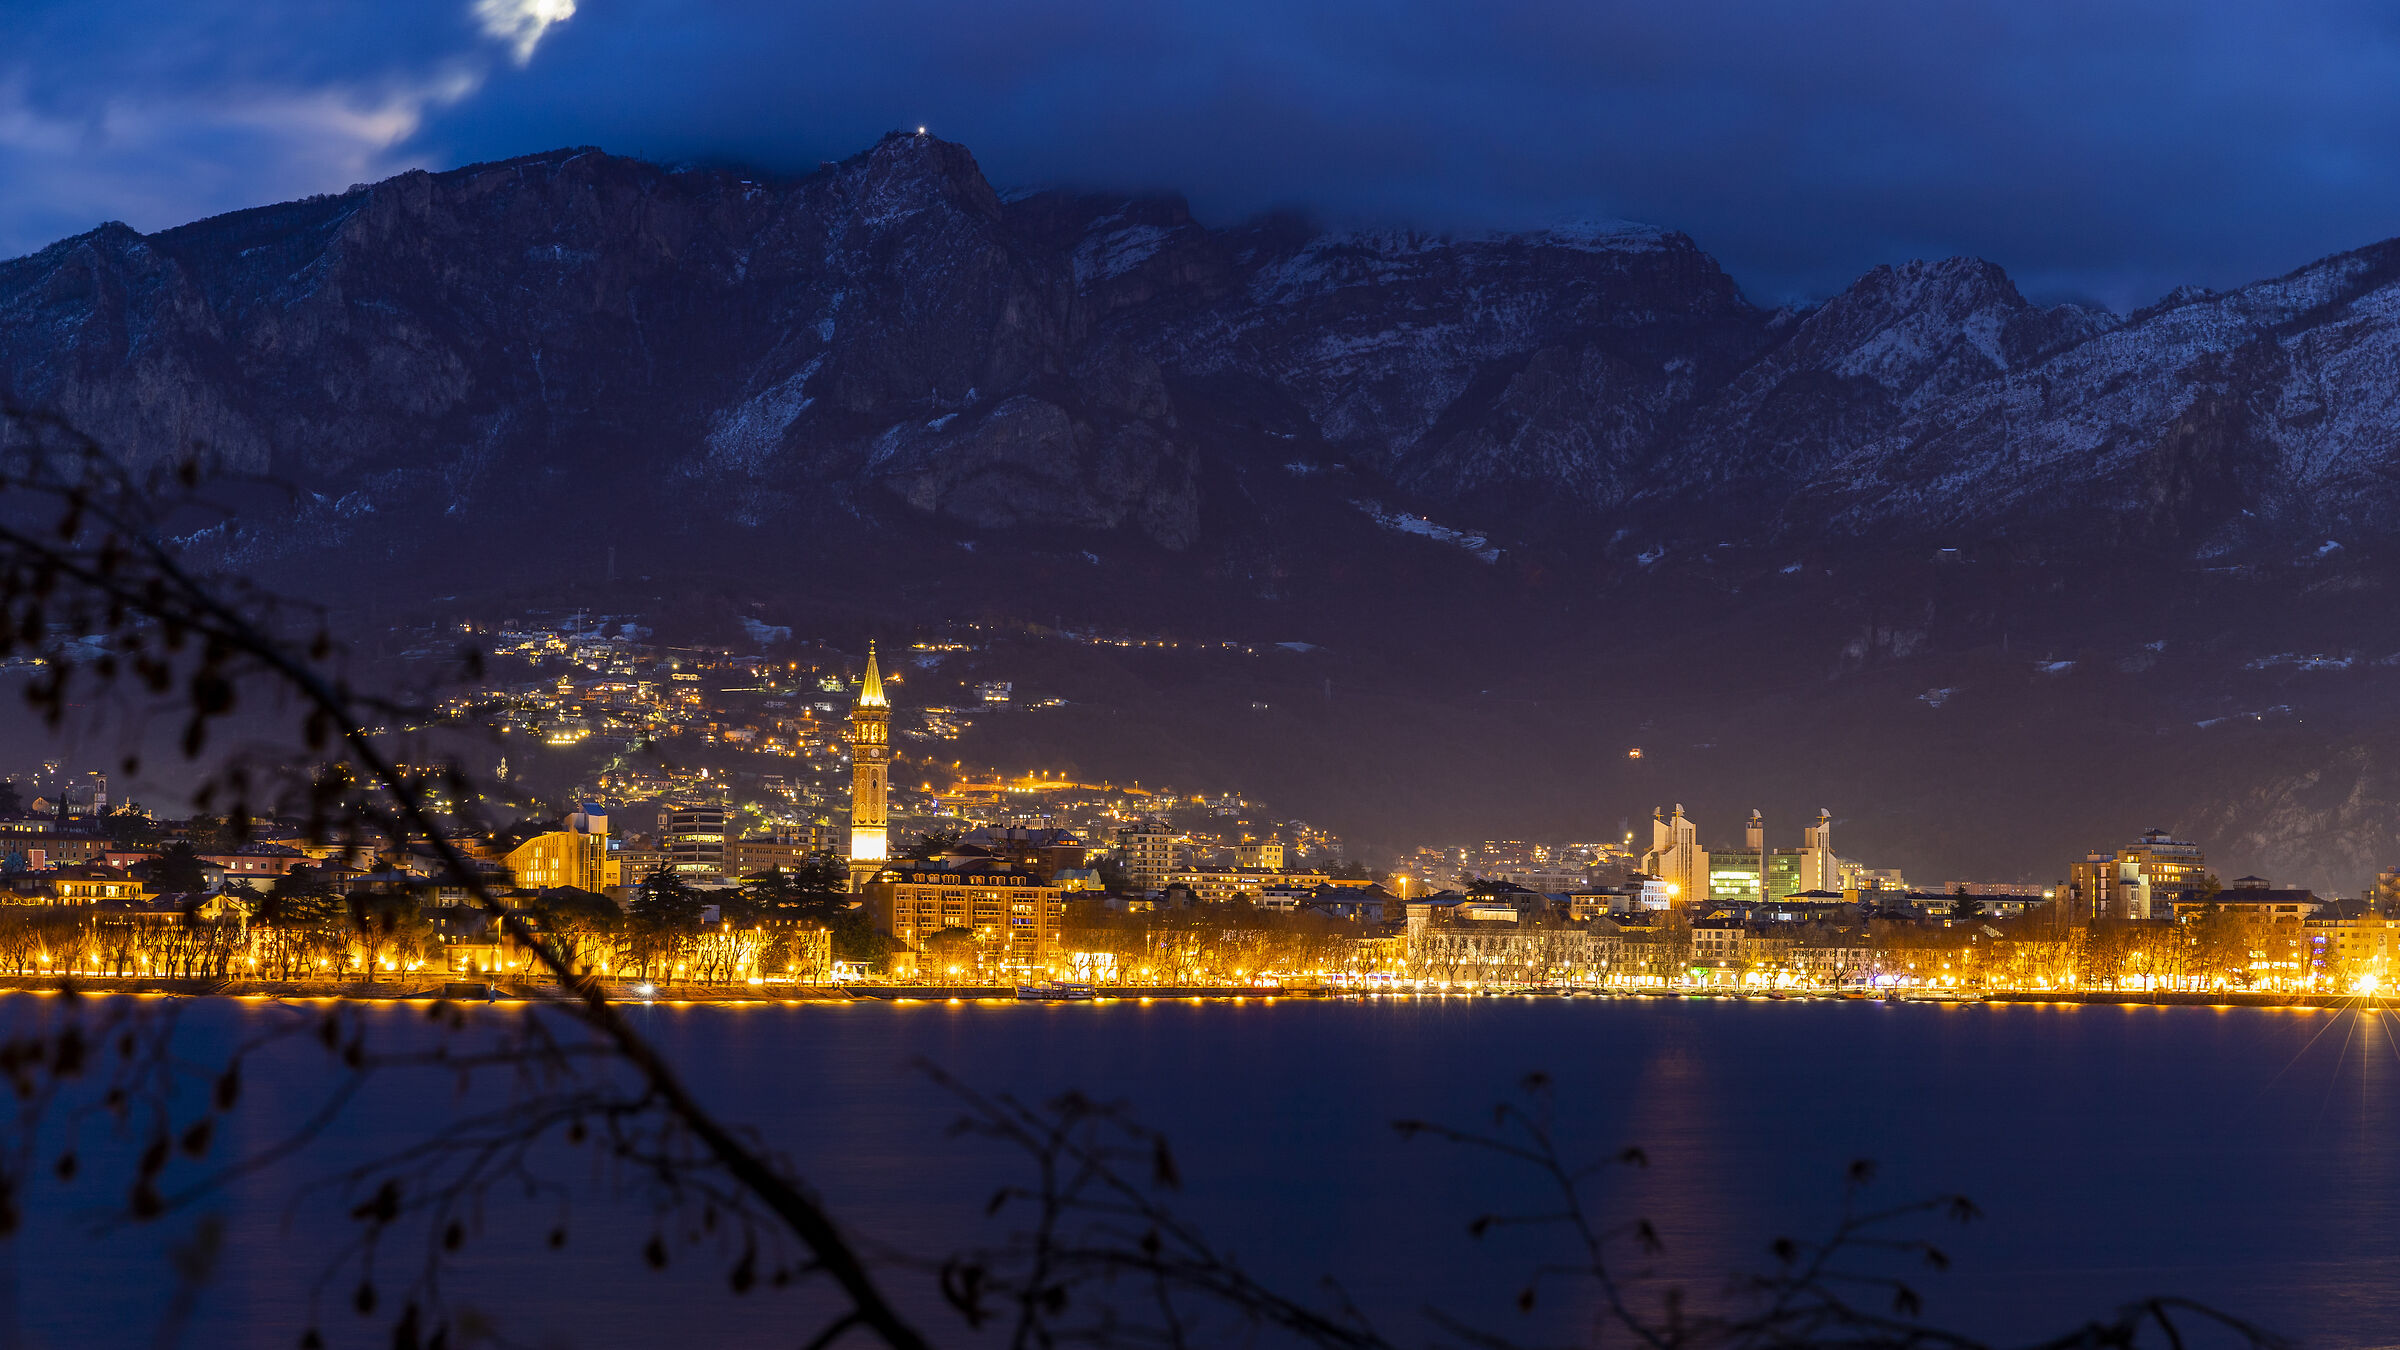 Lecco from below...